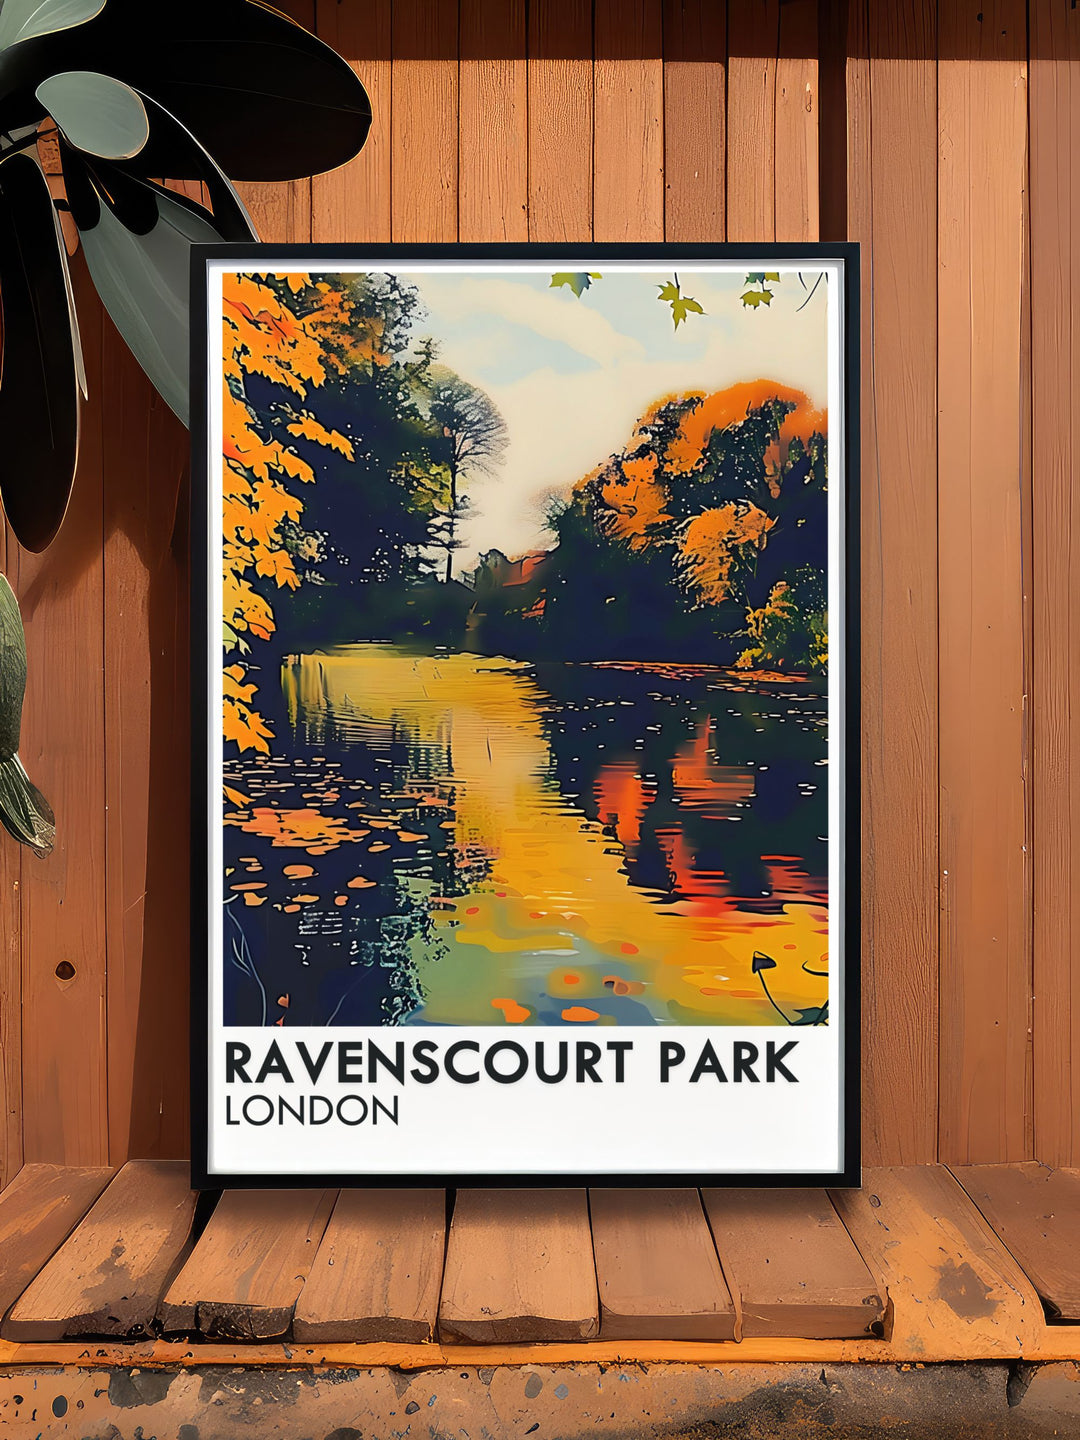 Ravenscourt Park Lake Artwork showcasing the peaceful lake with lush vegetation and iconic trees. This London Travel Print is perfect for enhancing your home decor with a serene and picturesque touch.